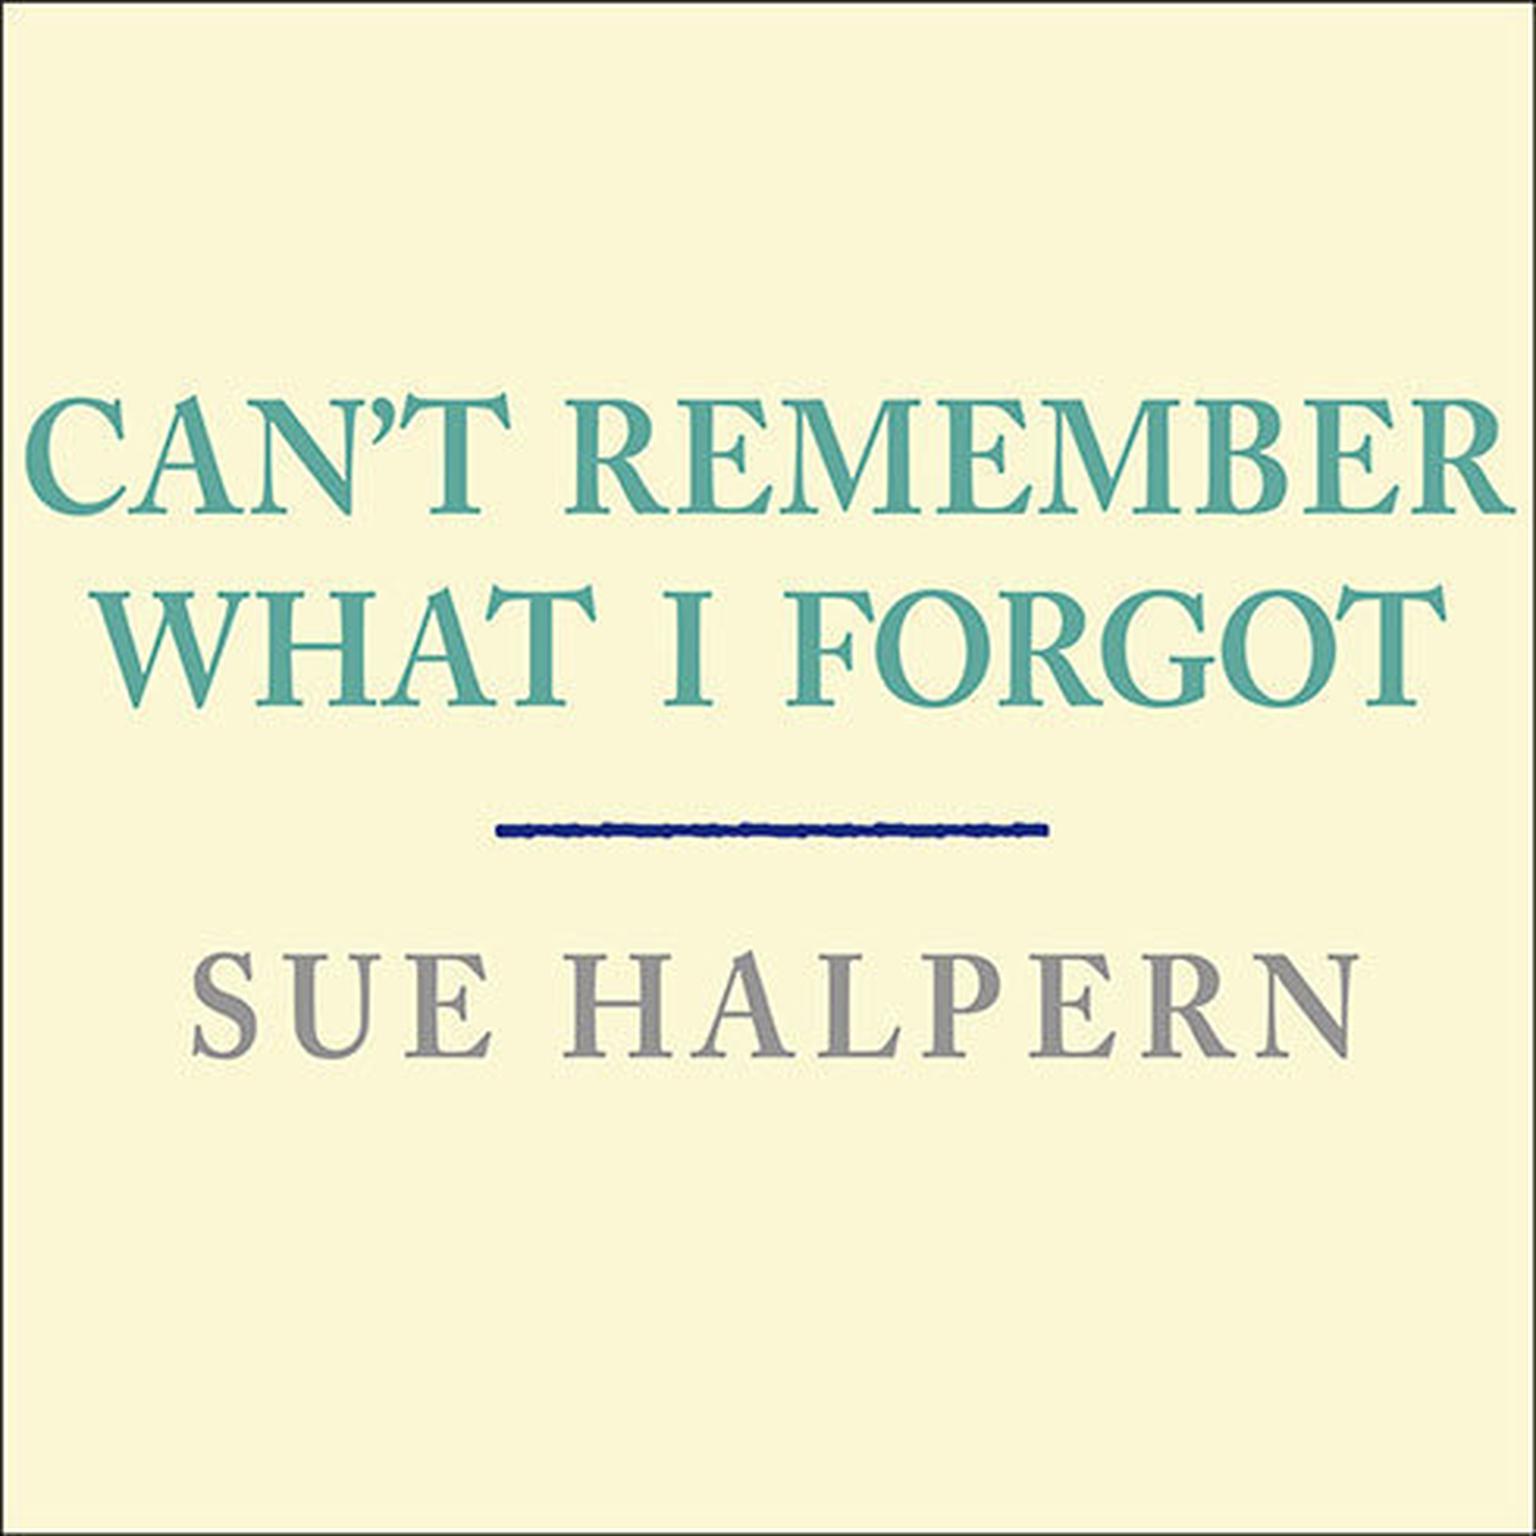 Cant Remember What I Forgot: The Good News from the Frontlines of Memory Research Audiobook, by Sue Halpern